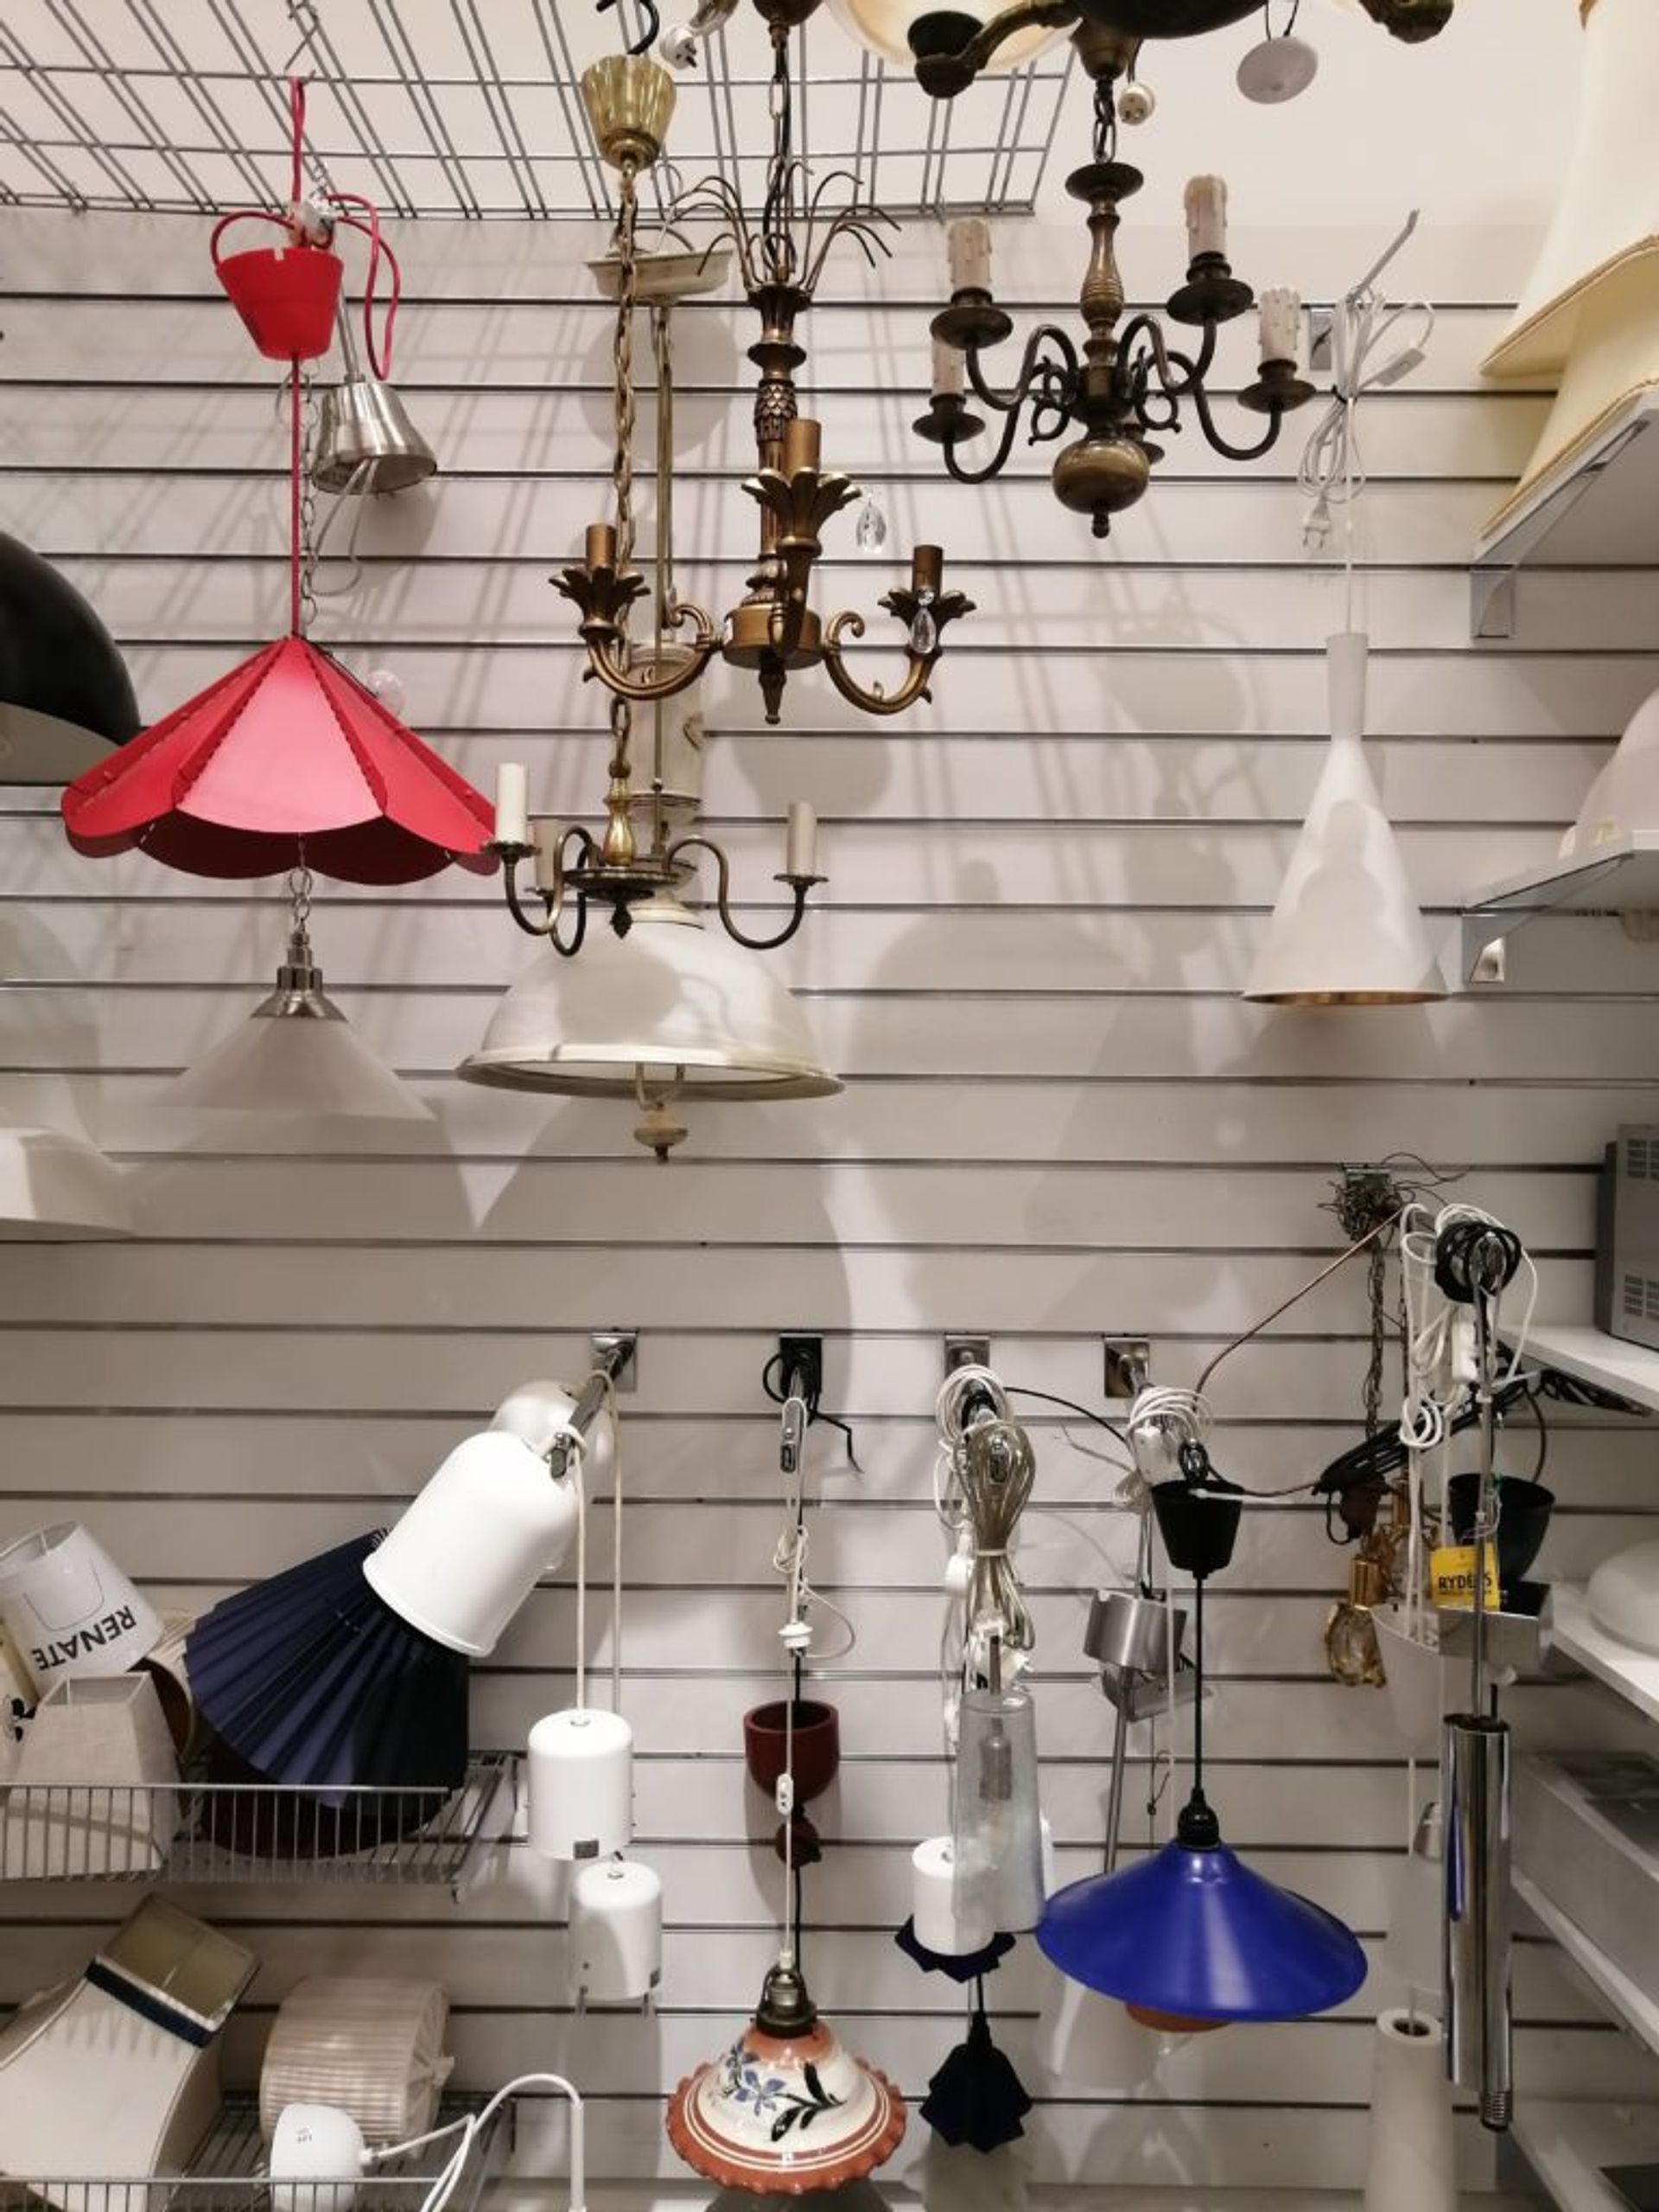 Racks and shelves of light fittings and lampshades.